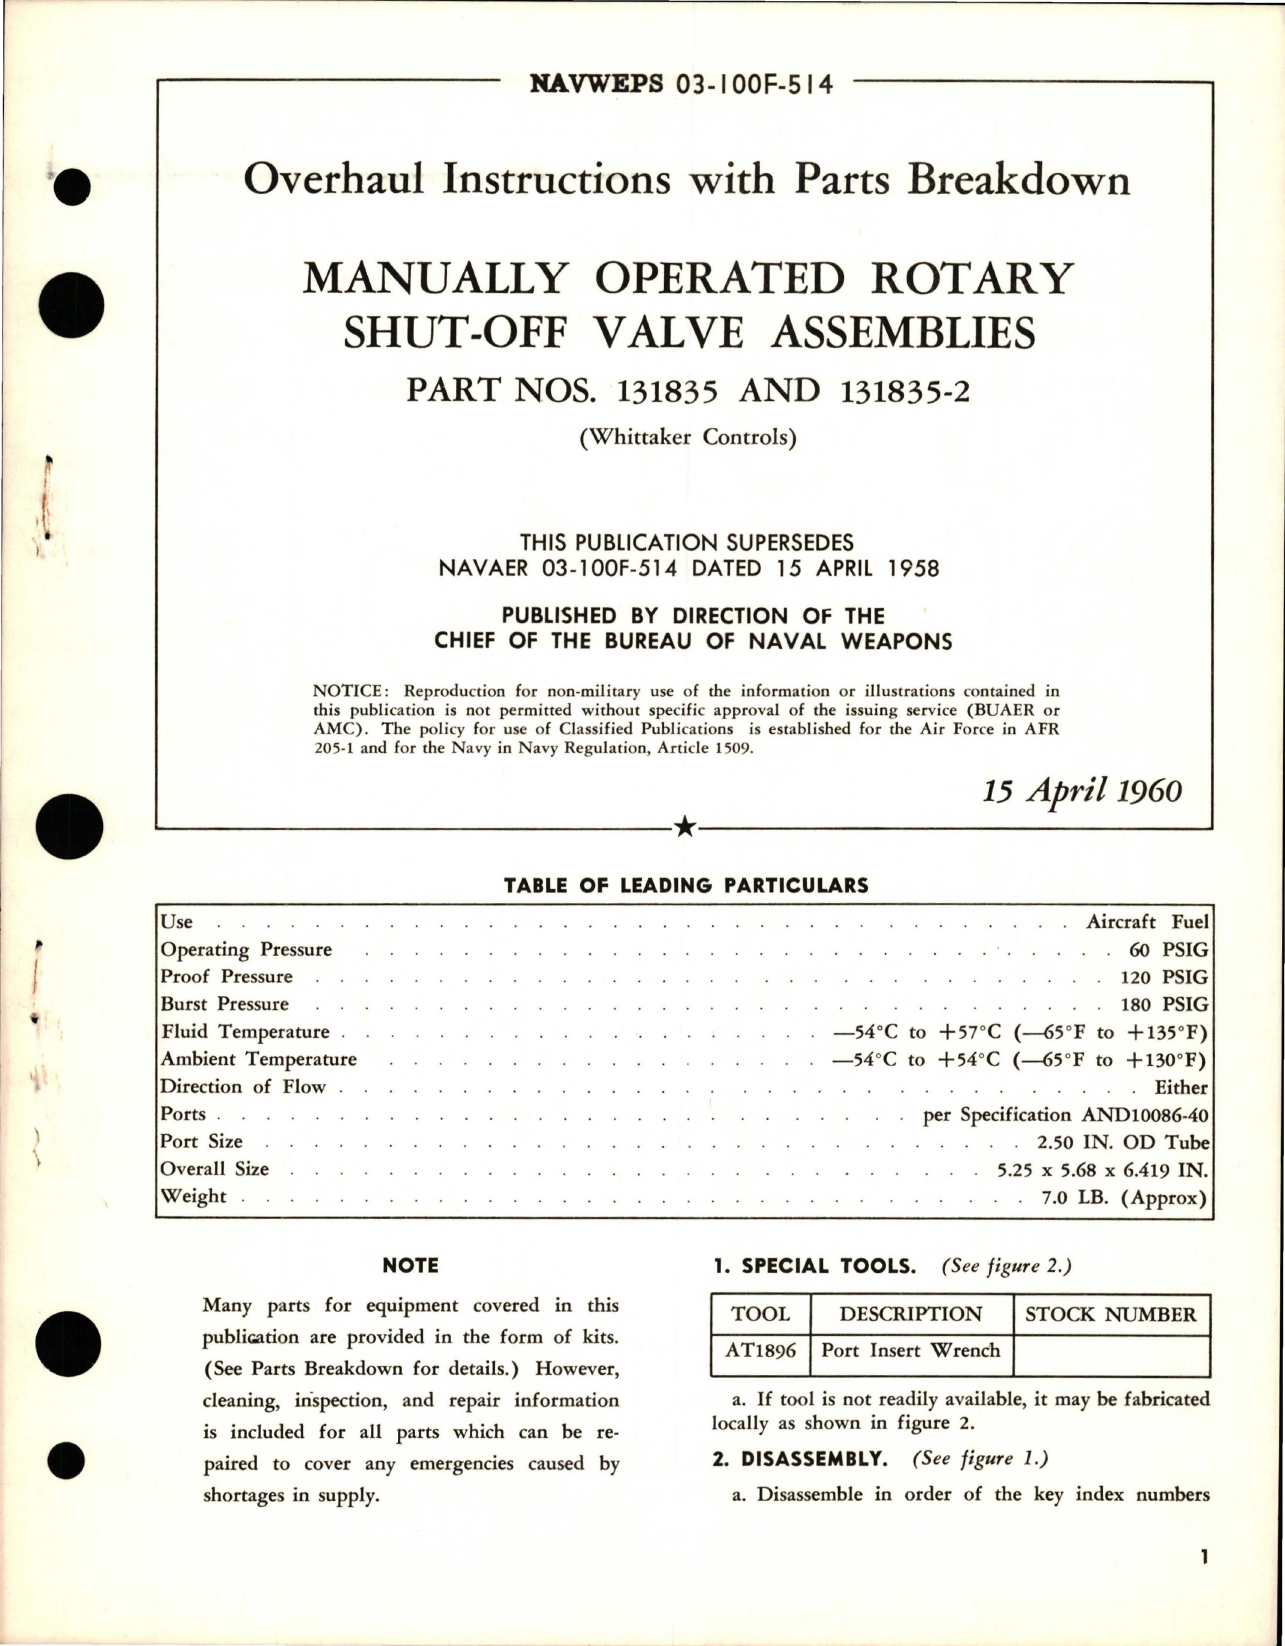 Sample page 1 from AirCorps Library document: Overhaul Instructions with Parts Breakdown for Manually Operated Rotary Shut-Off Valve Assemblies - Parts 131835 and 131835-2